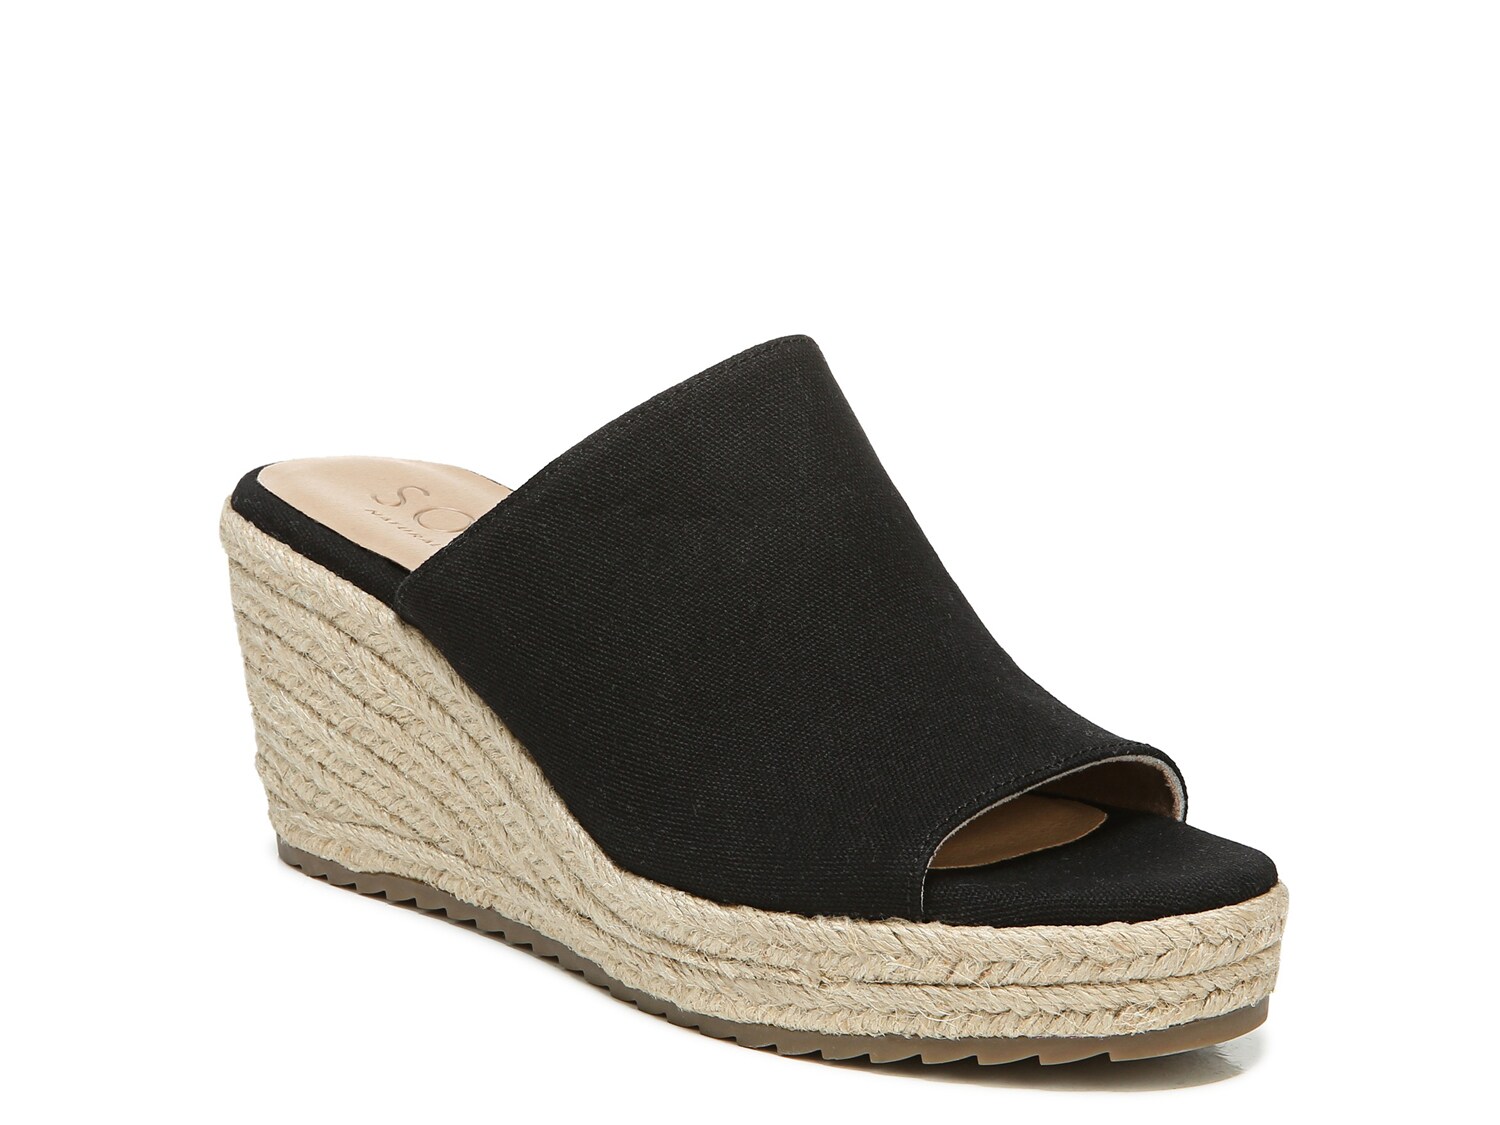 SOUL Naturalizer Oodles Espadrille Wedge Sandal - Free Shipping | DSW